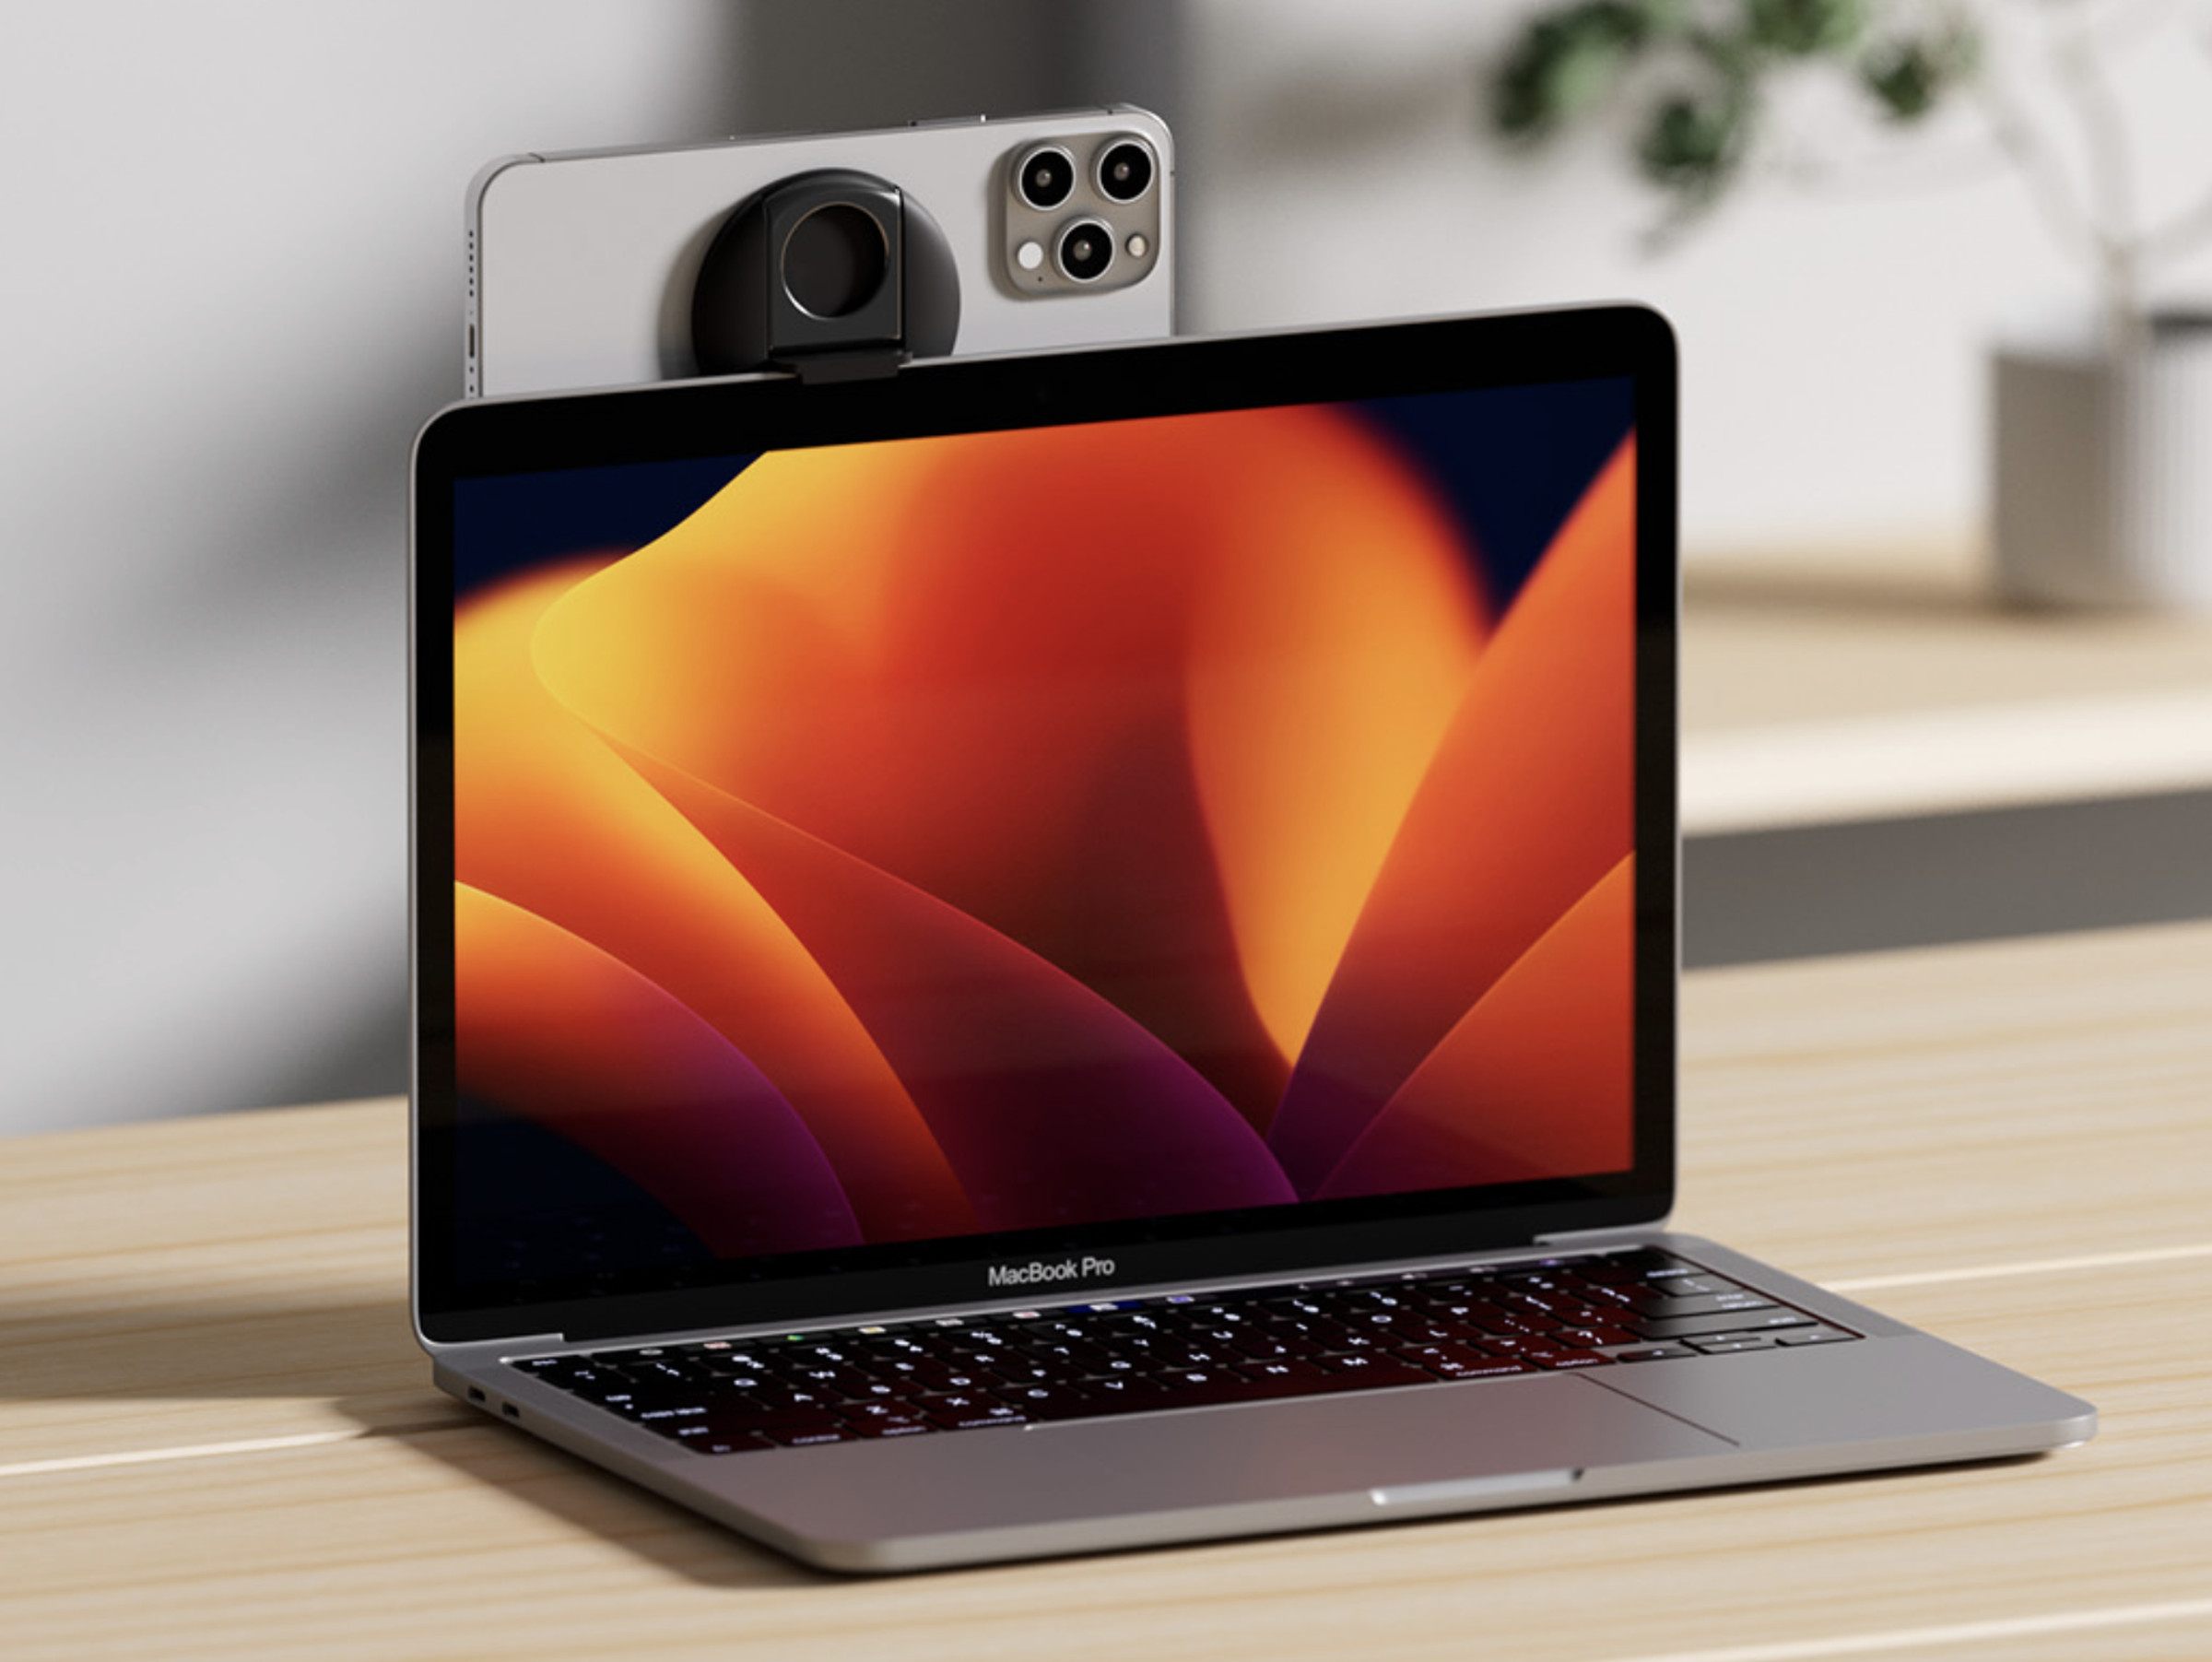 Photo of the Belkin iPhone mount on top of a MacBook Pro.